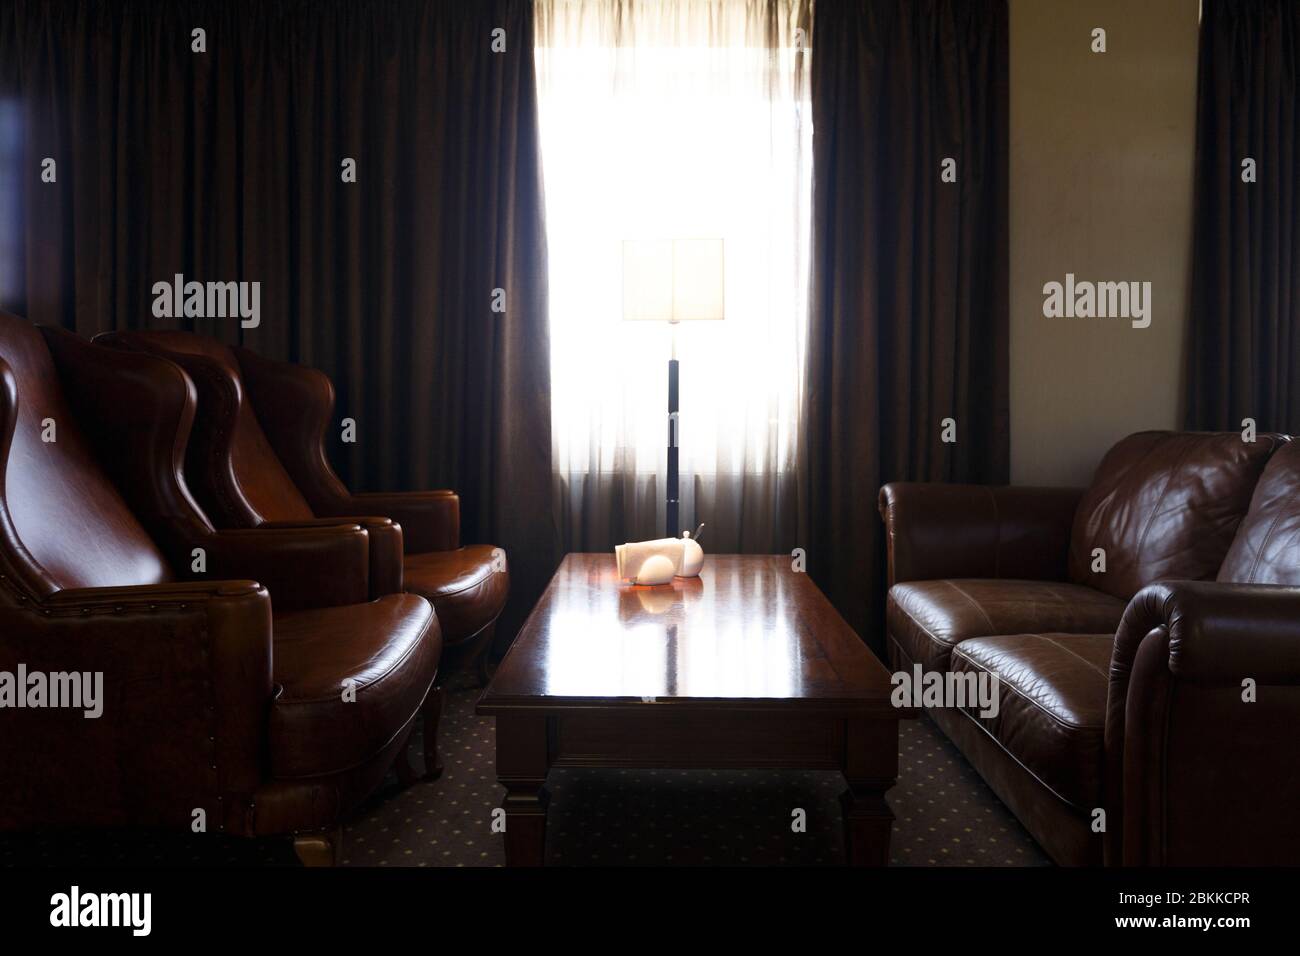 Interior room with leather armchairs and sofa Stock Photo